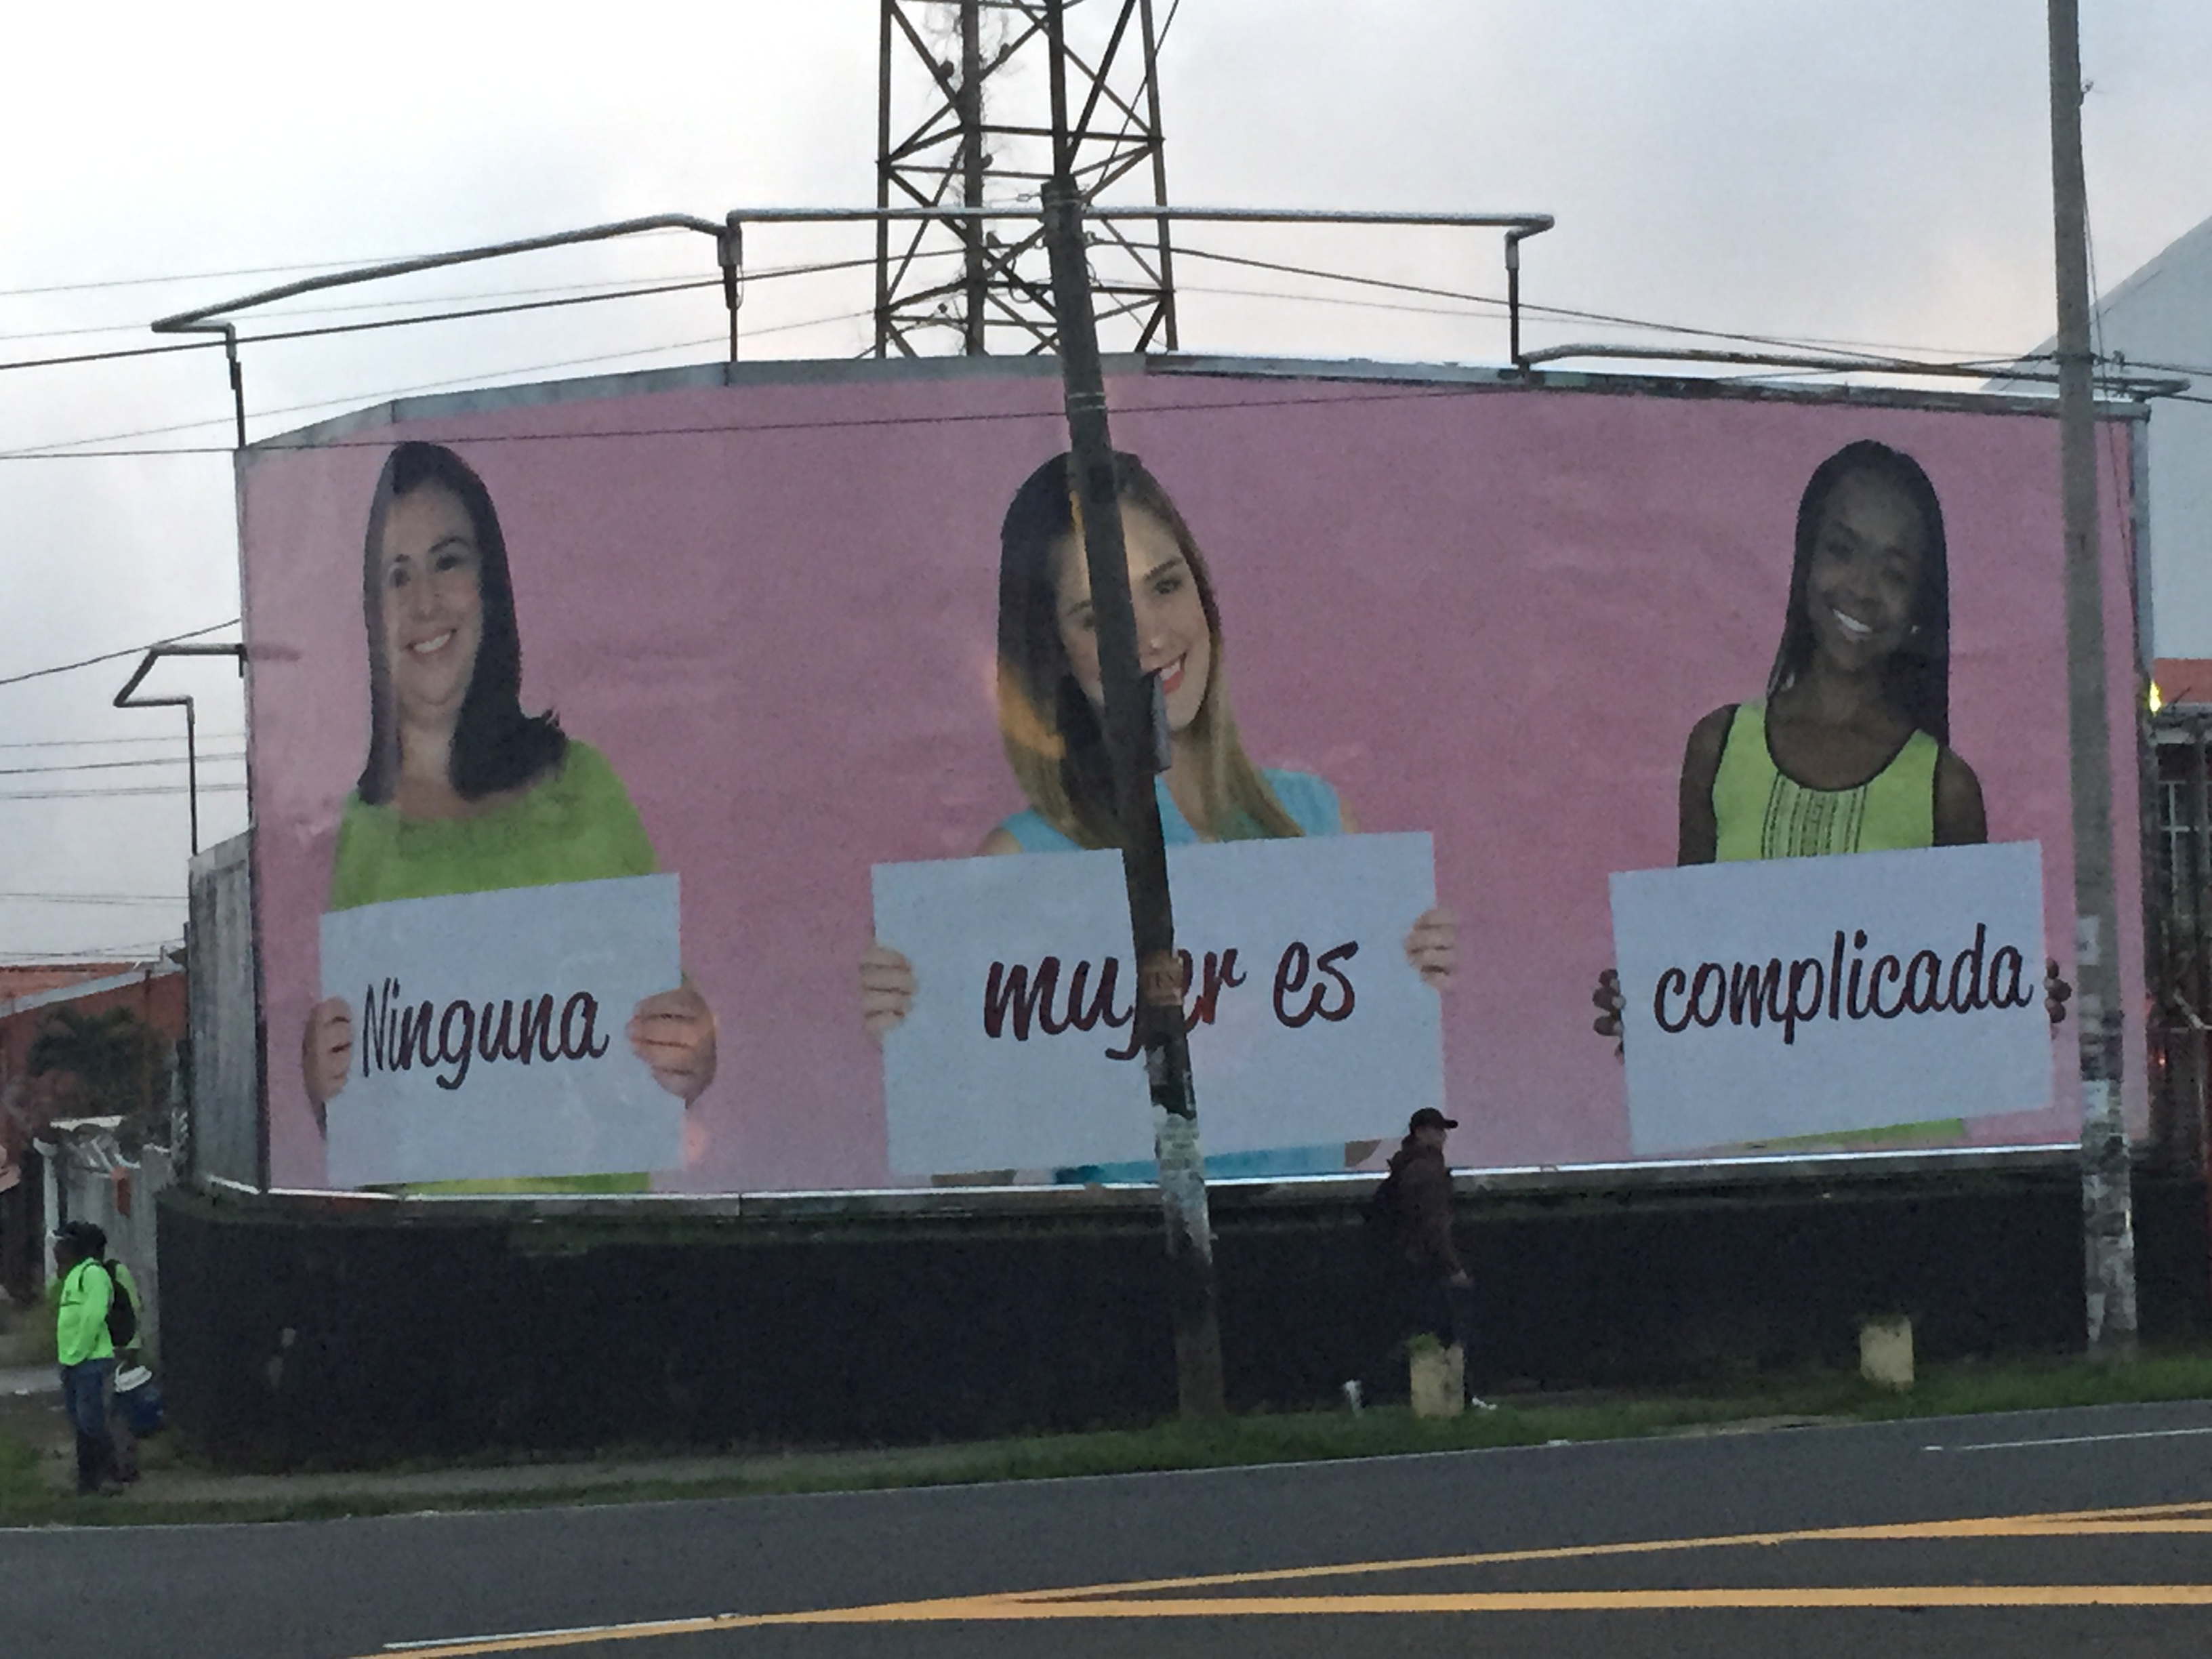 The giant billboard in front of my neighborhood which translates as "Nothing about Women is complicated." This is an advertisement for Banca Kristal. Does this ad challenge or perpetuate sexism? 